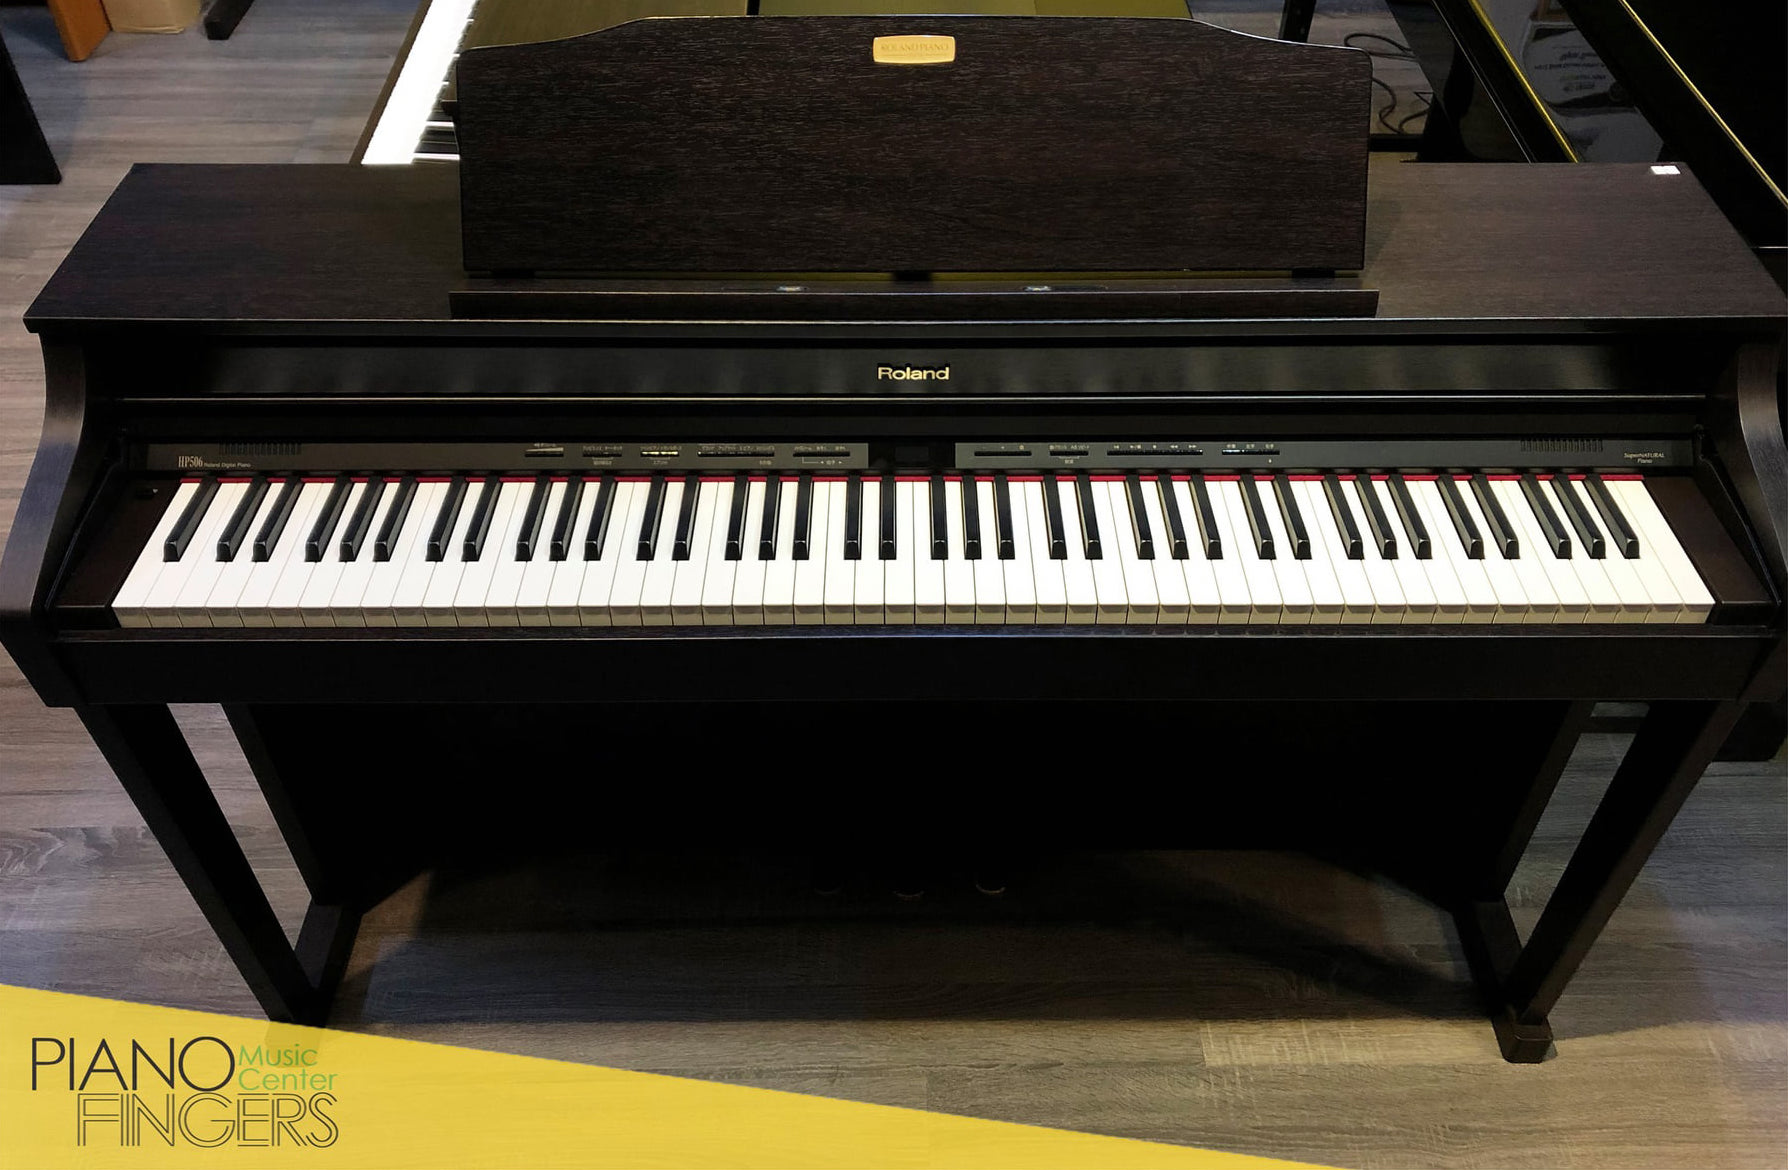 Review piano điện Roland HP-506